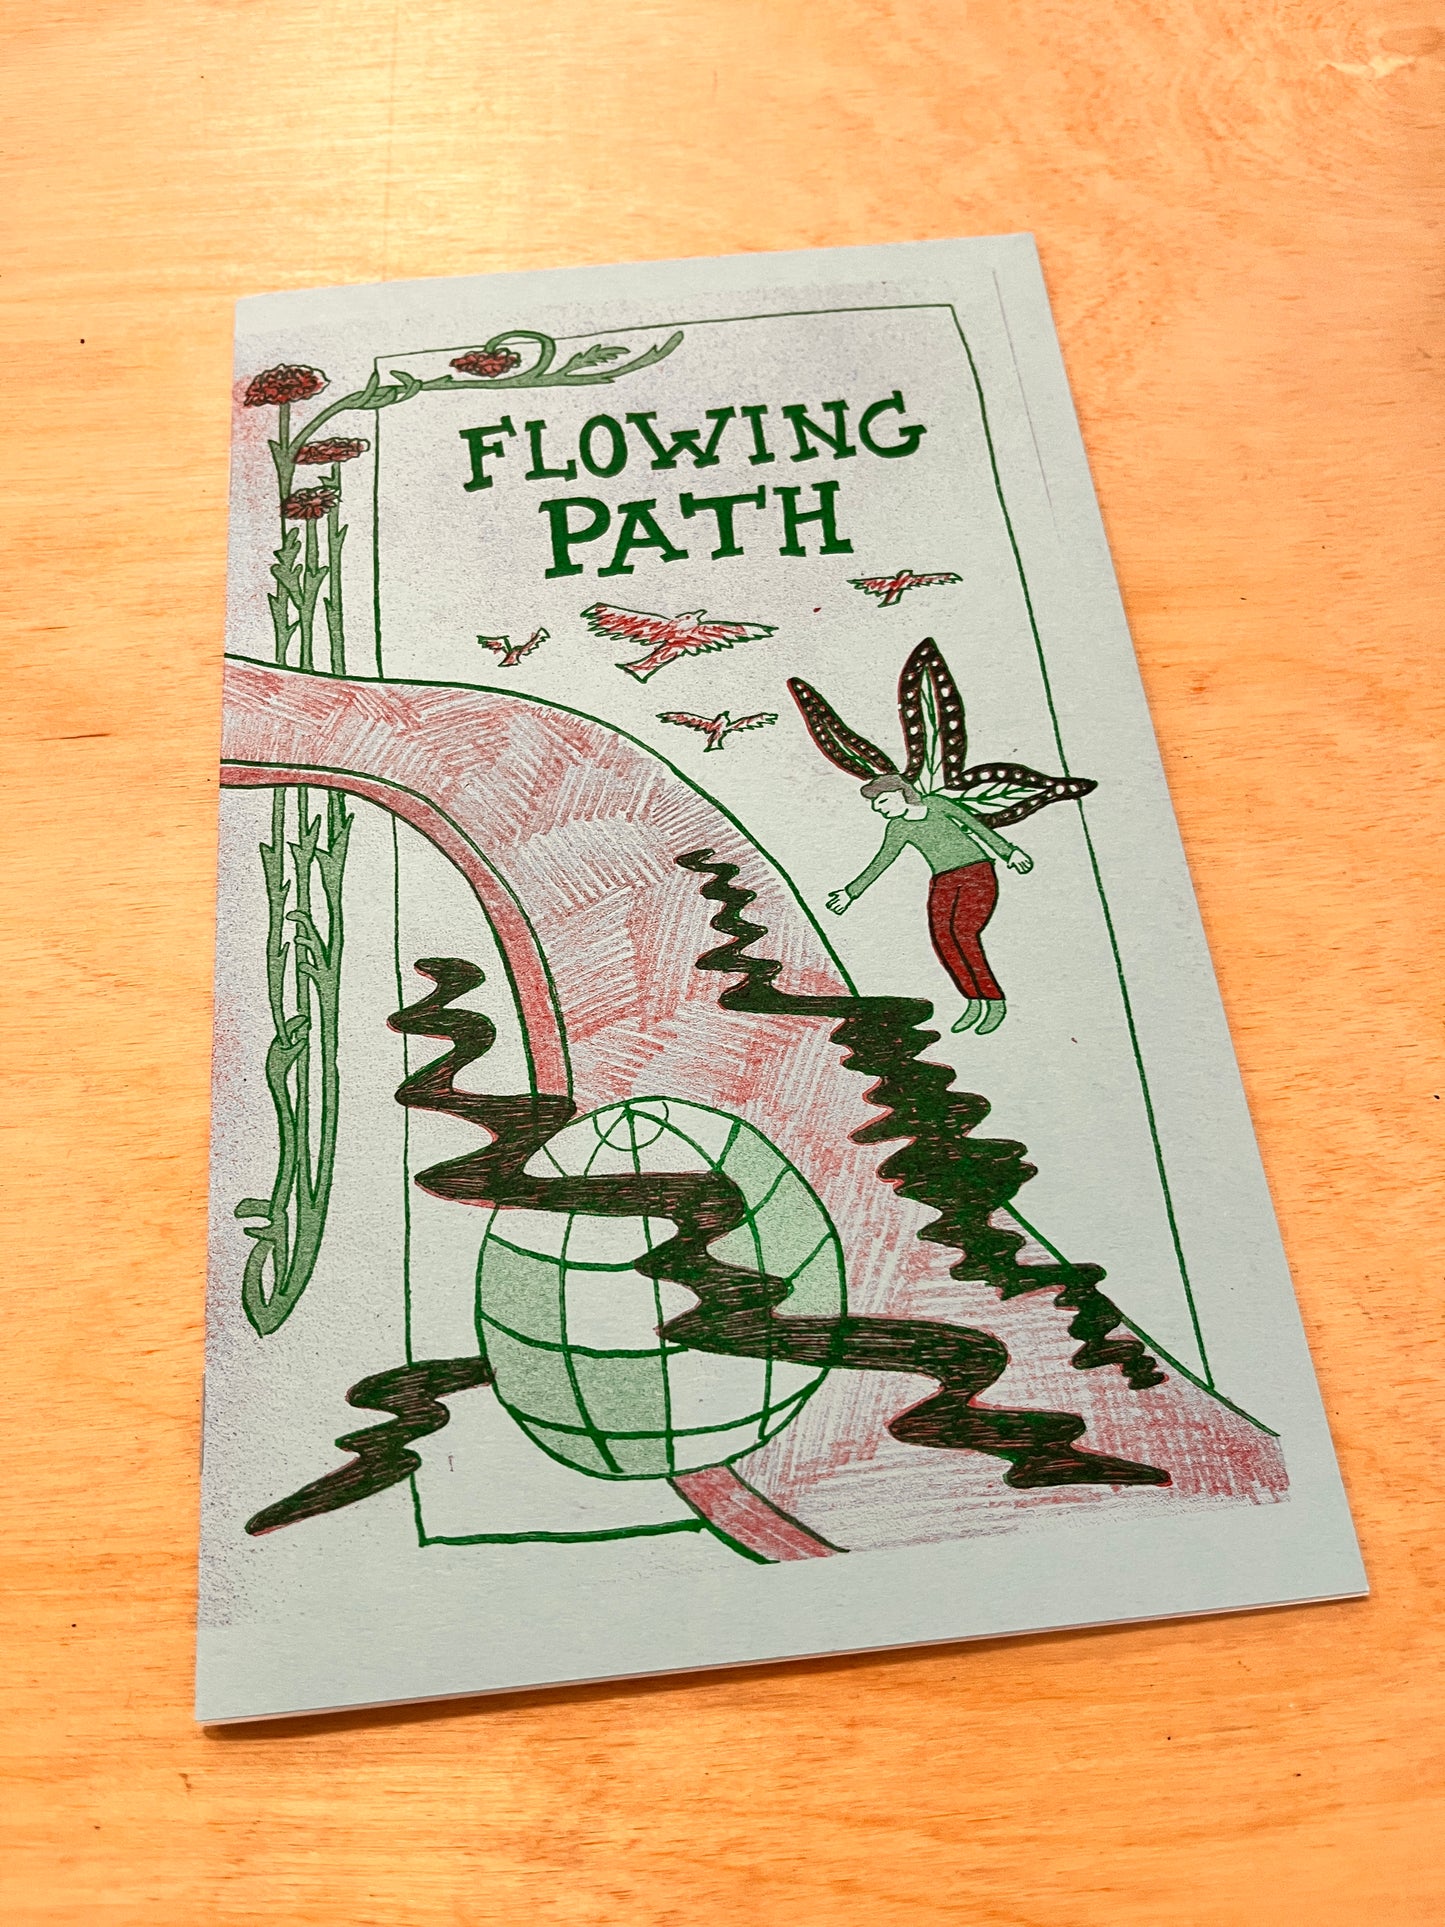 Flowing Path